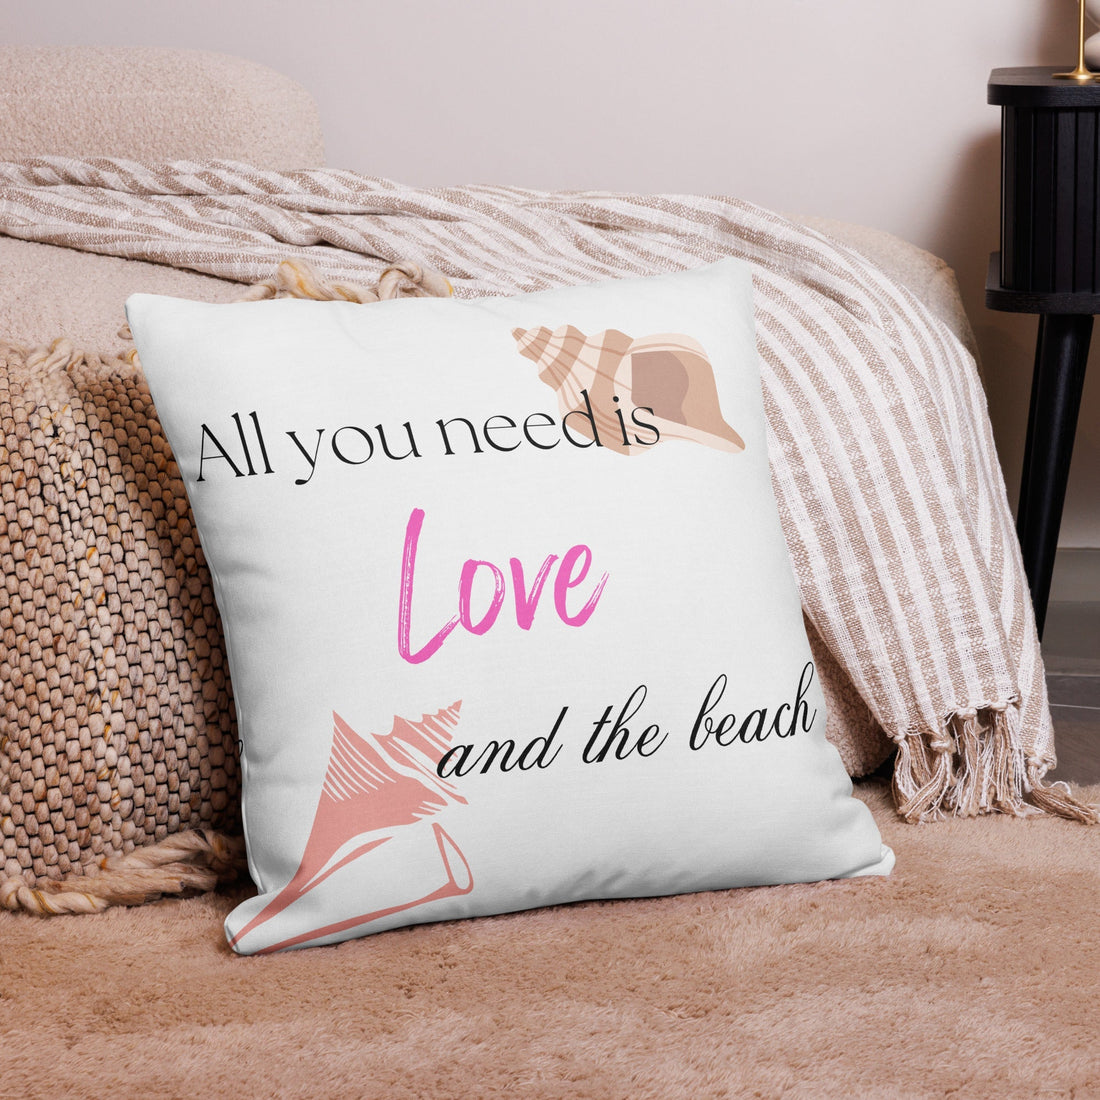 Love & the Beach Pillow: A Perfect Combination for Relaxation - Creative Coastal Decor